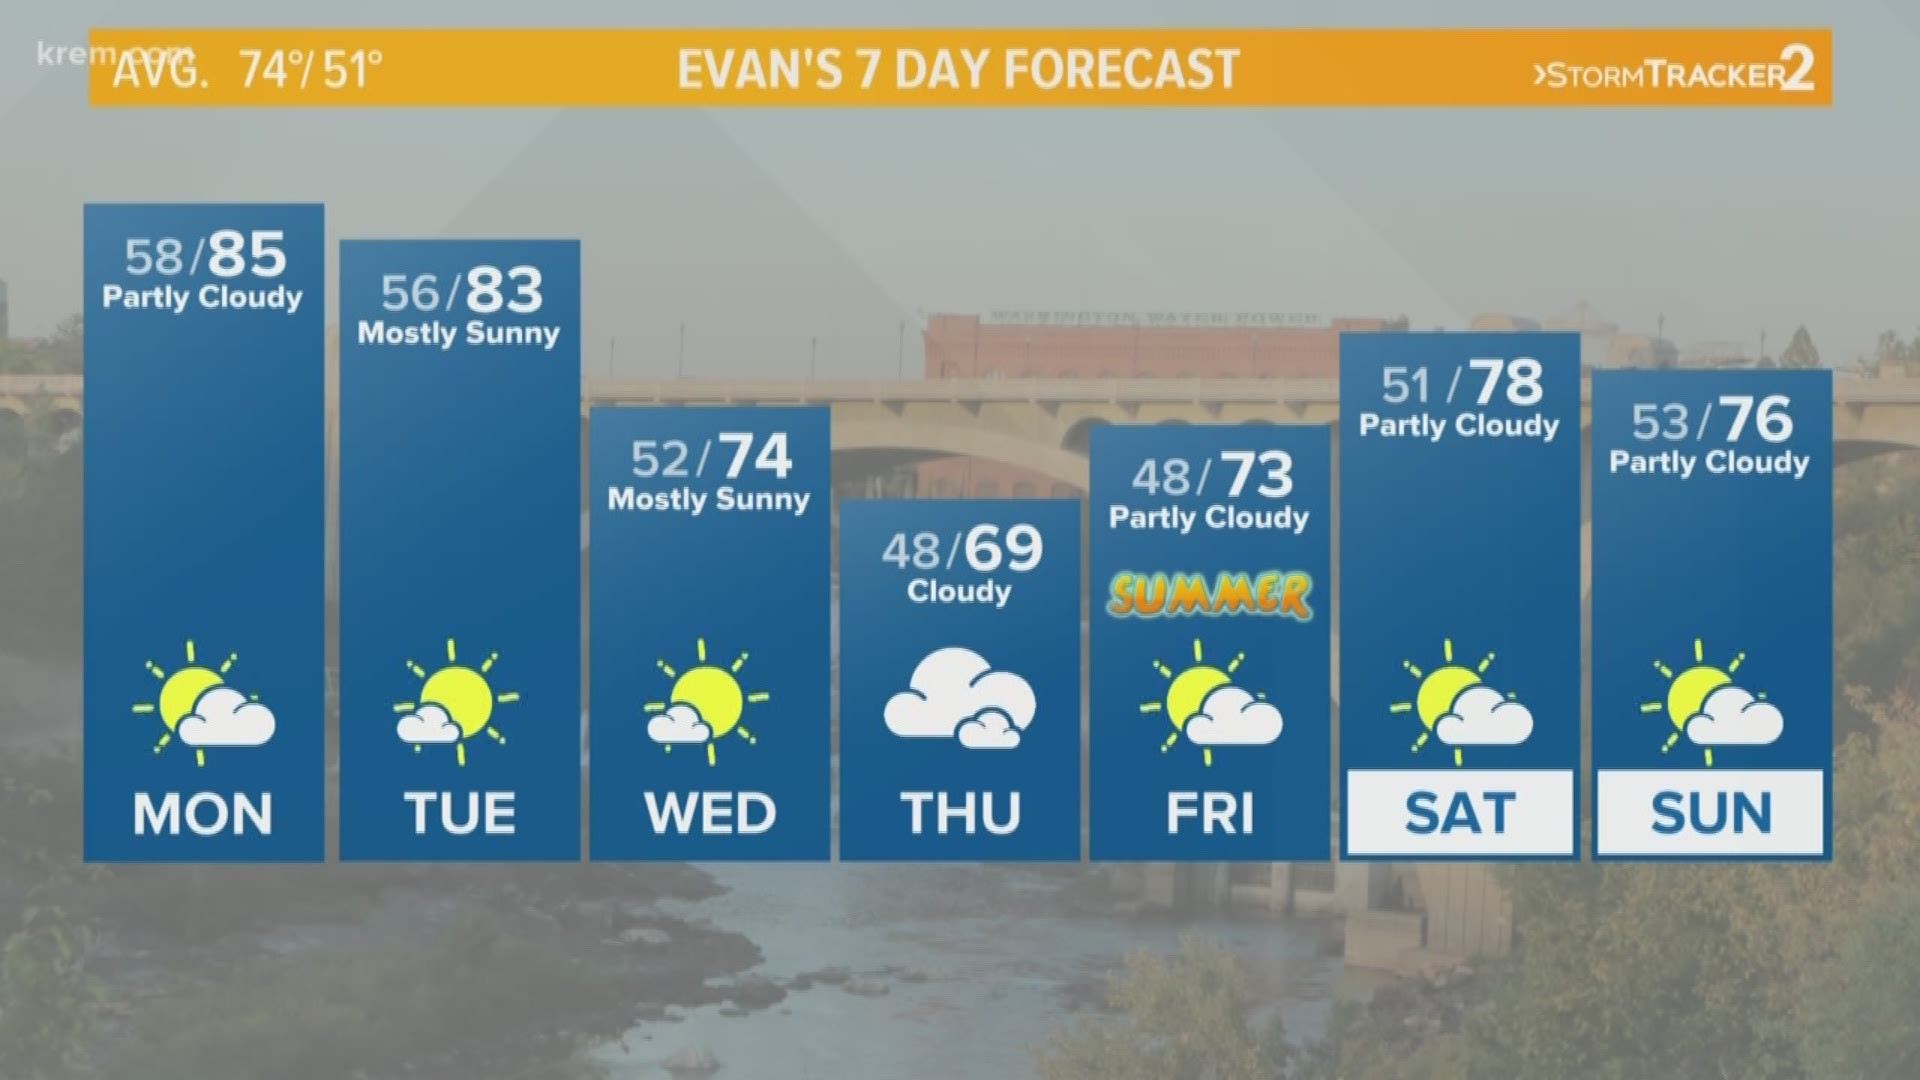 KREM 2 News at Noon weather forecast for eastern and central Washington and North Idaho on July 17, 2019